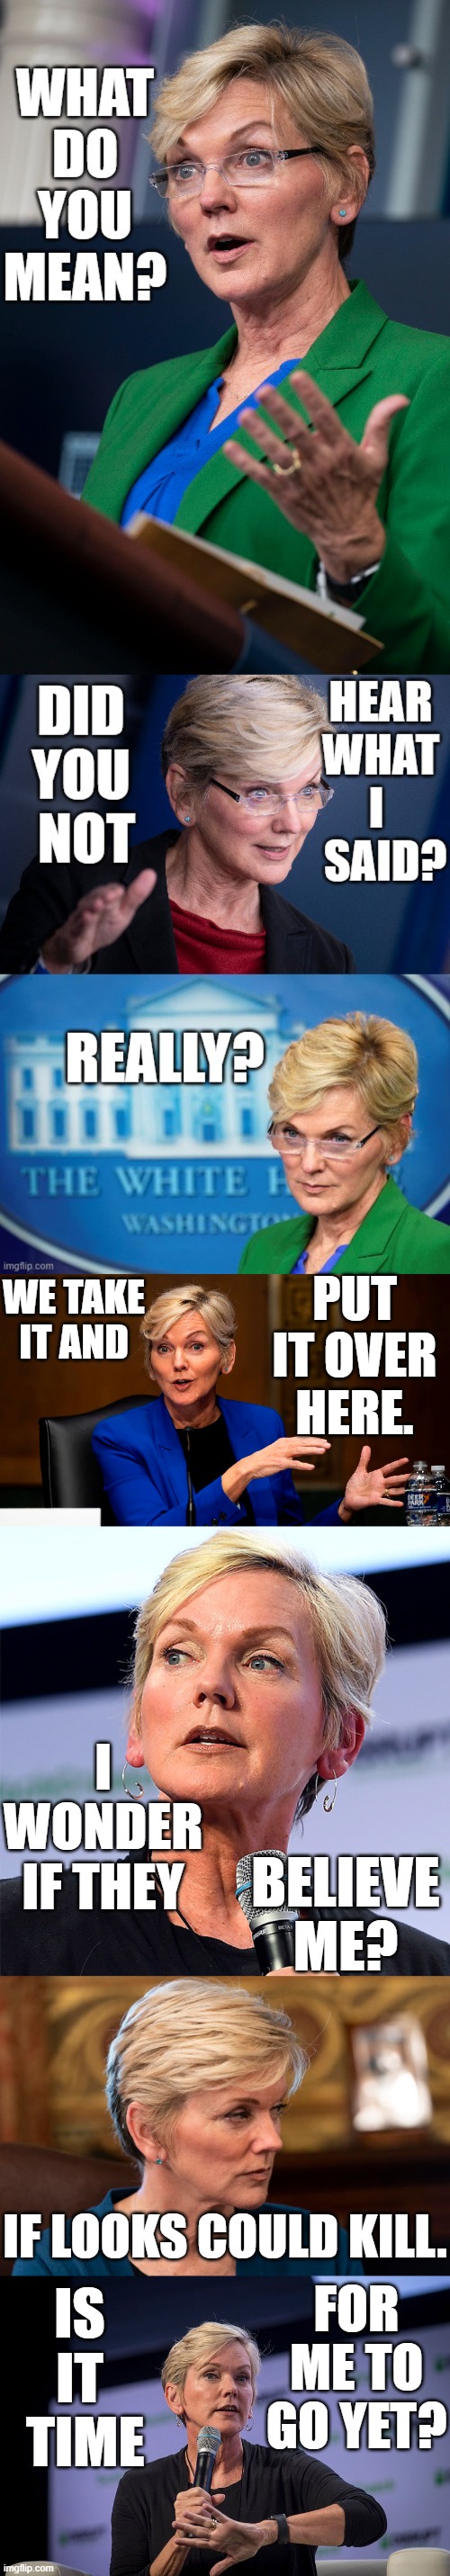 Having Fun With Politics...The Facial Expressions Of Energy Secretary Jennifer Granholm | PUT IT OVER HERE. WE TAKE IT AND; I WONDER IF THEY; BELIEVE ME? IS IT  TIME; IF LOOKS COULD KILL. FOR ME TO GO YET? | image tagged in memes,politics,having fun,energy,secretary,facial expressions | made w/ Imgflip meme maker